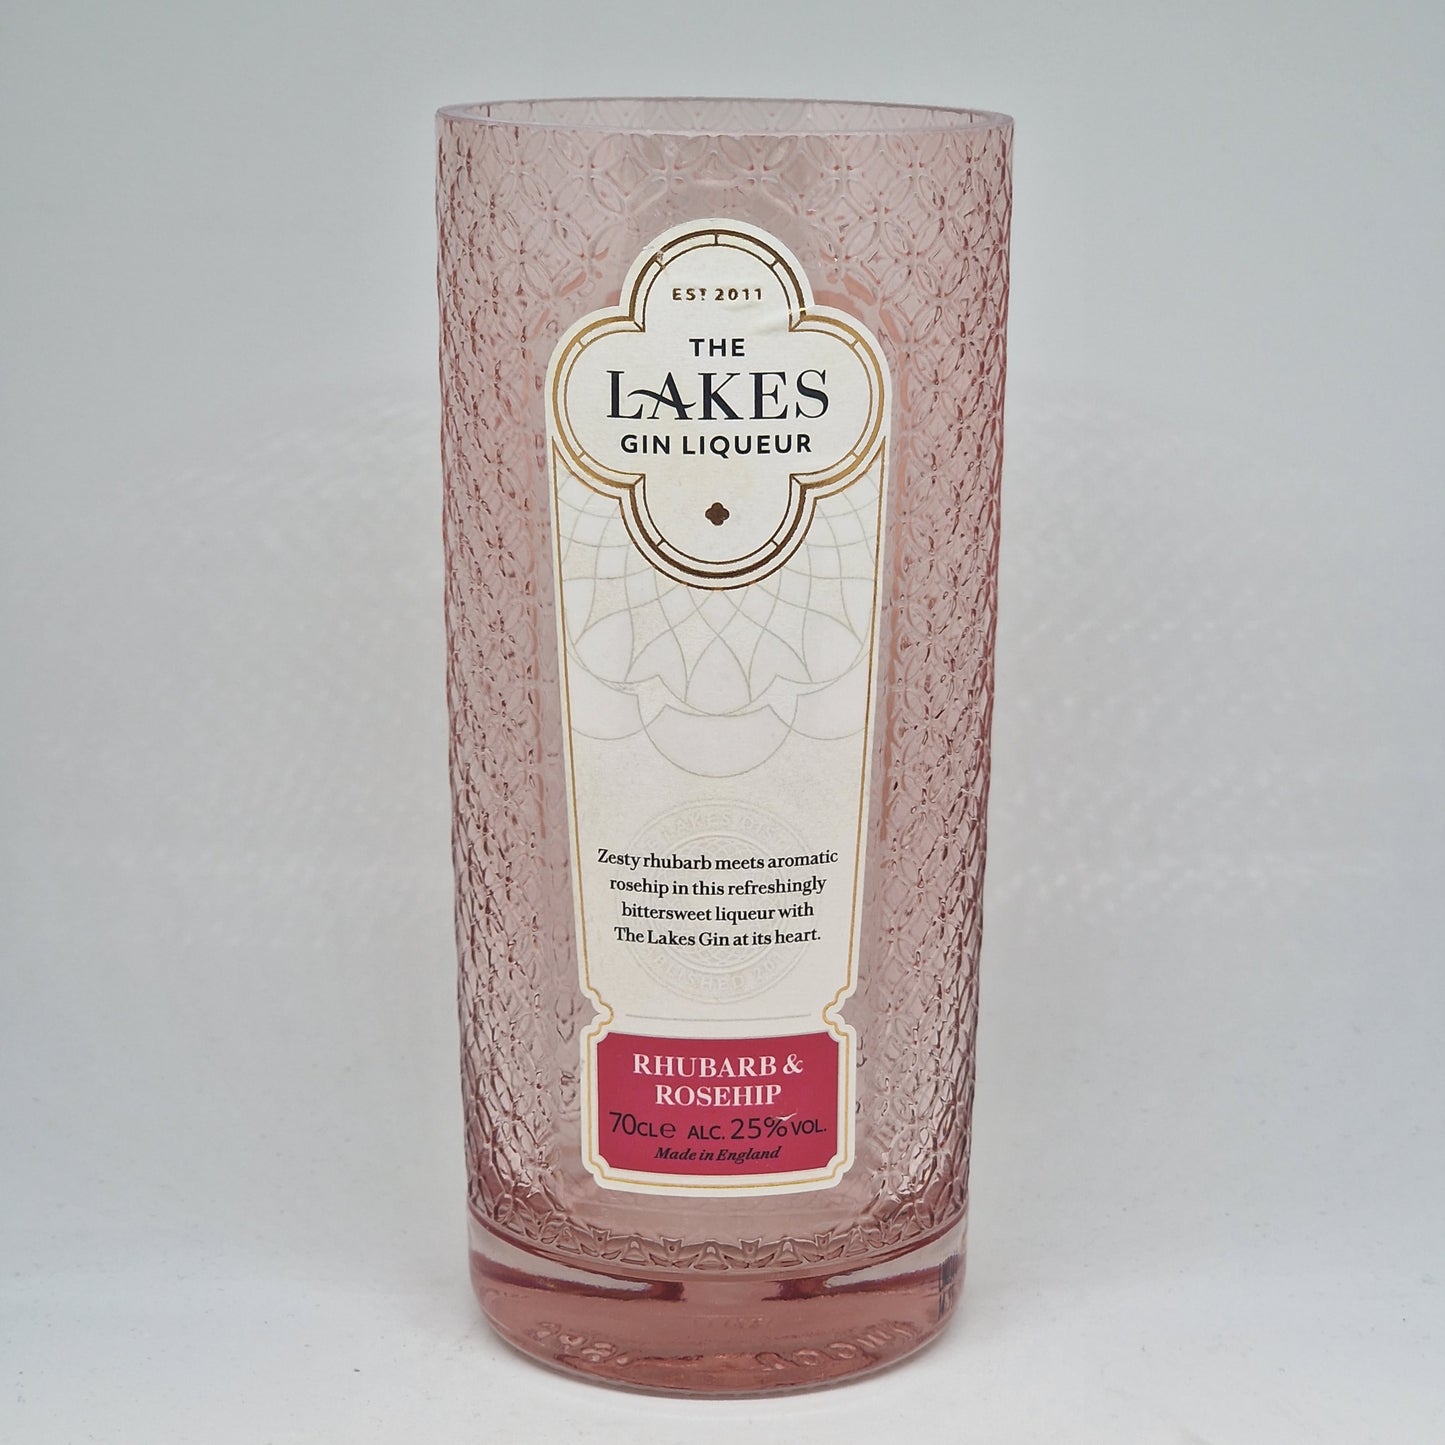 The Lakes Gin Liqueur Rhubarb & Rosehip Bottle Candle